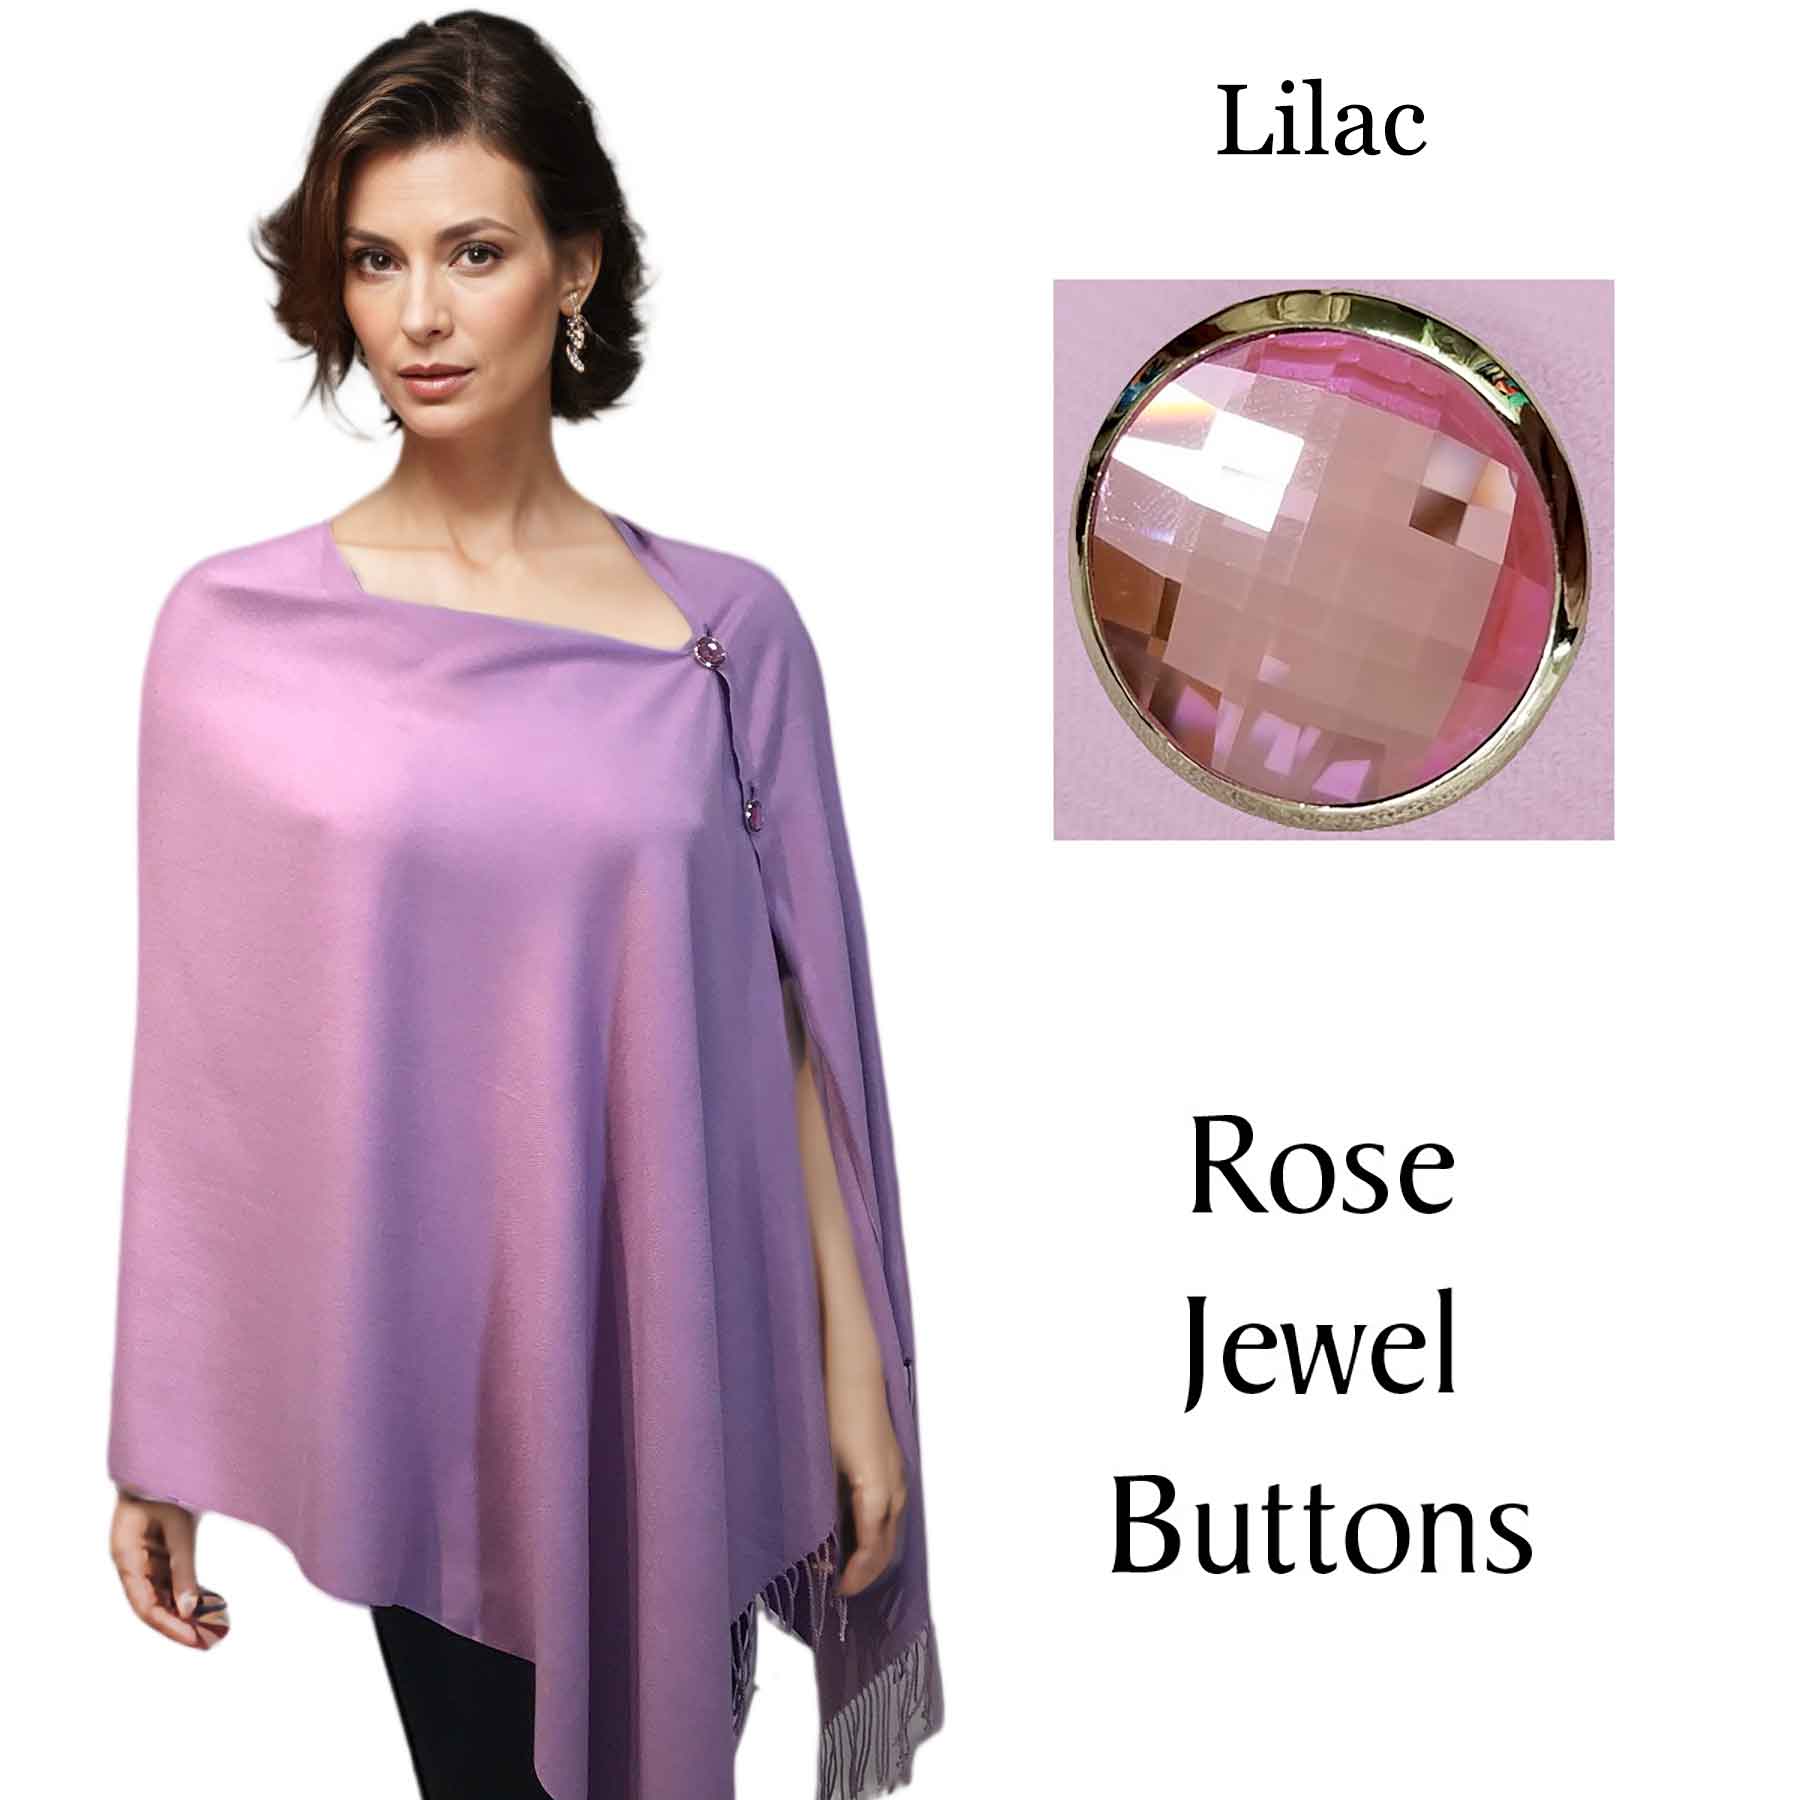 #30 Lilac with Rose Jewel Buttons